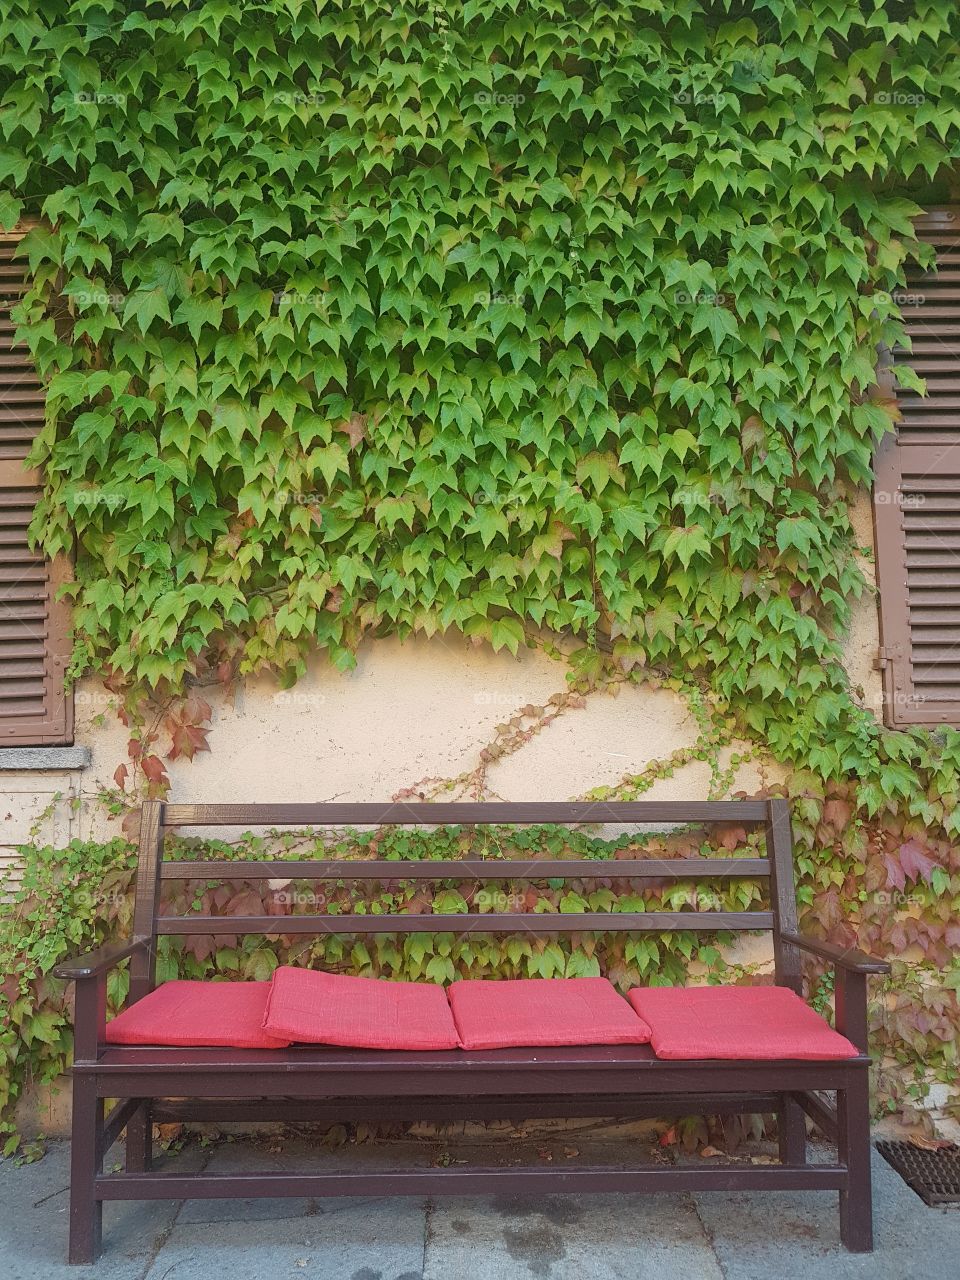 Wood bench with red cushions against a wall green covered